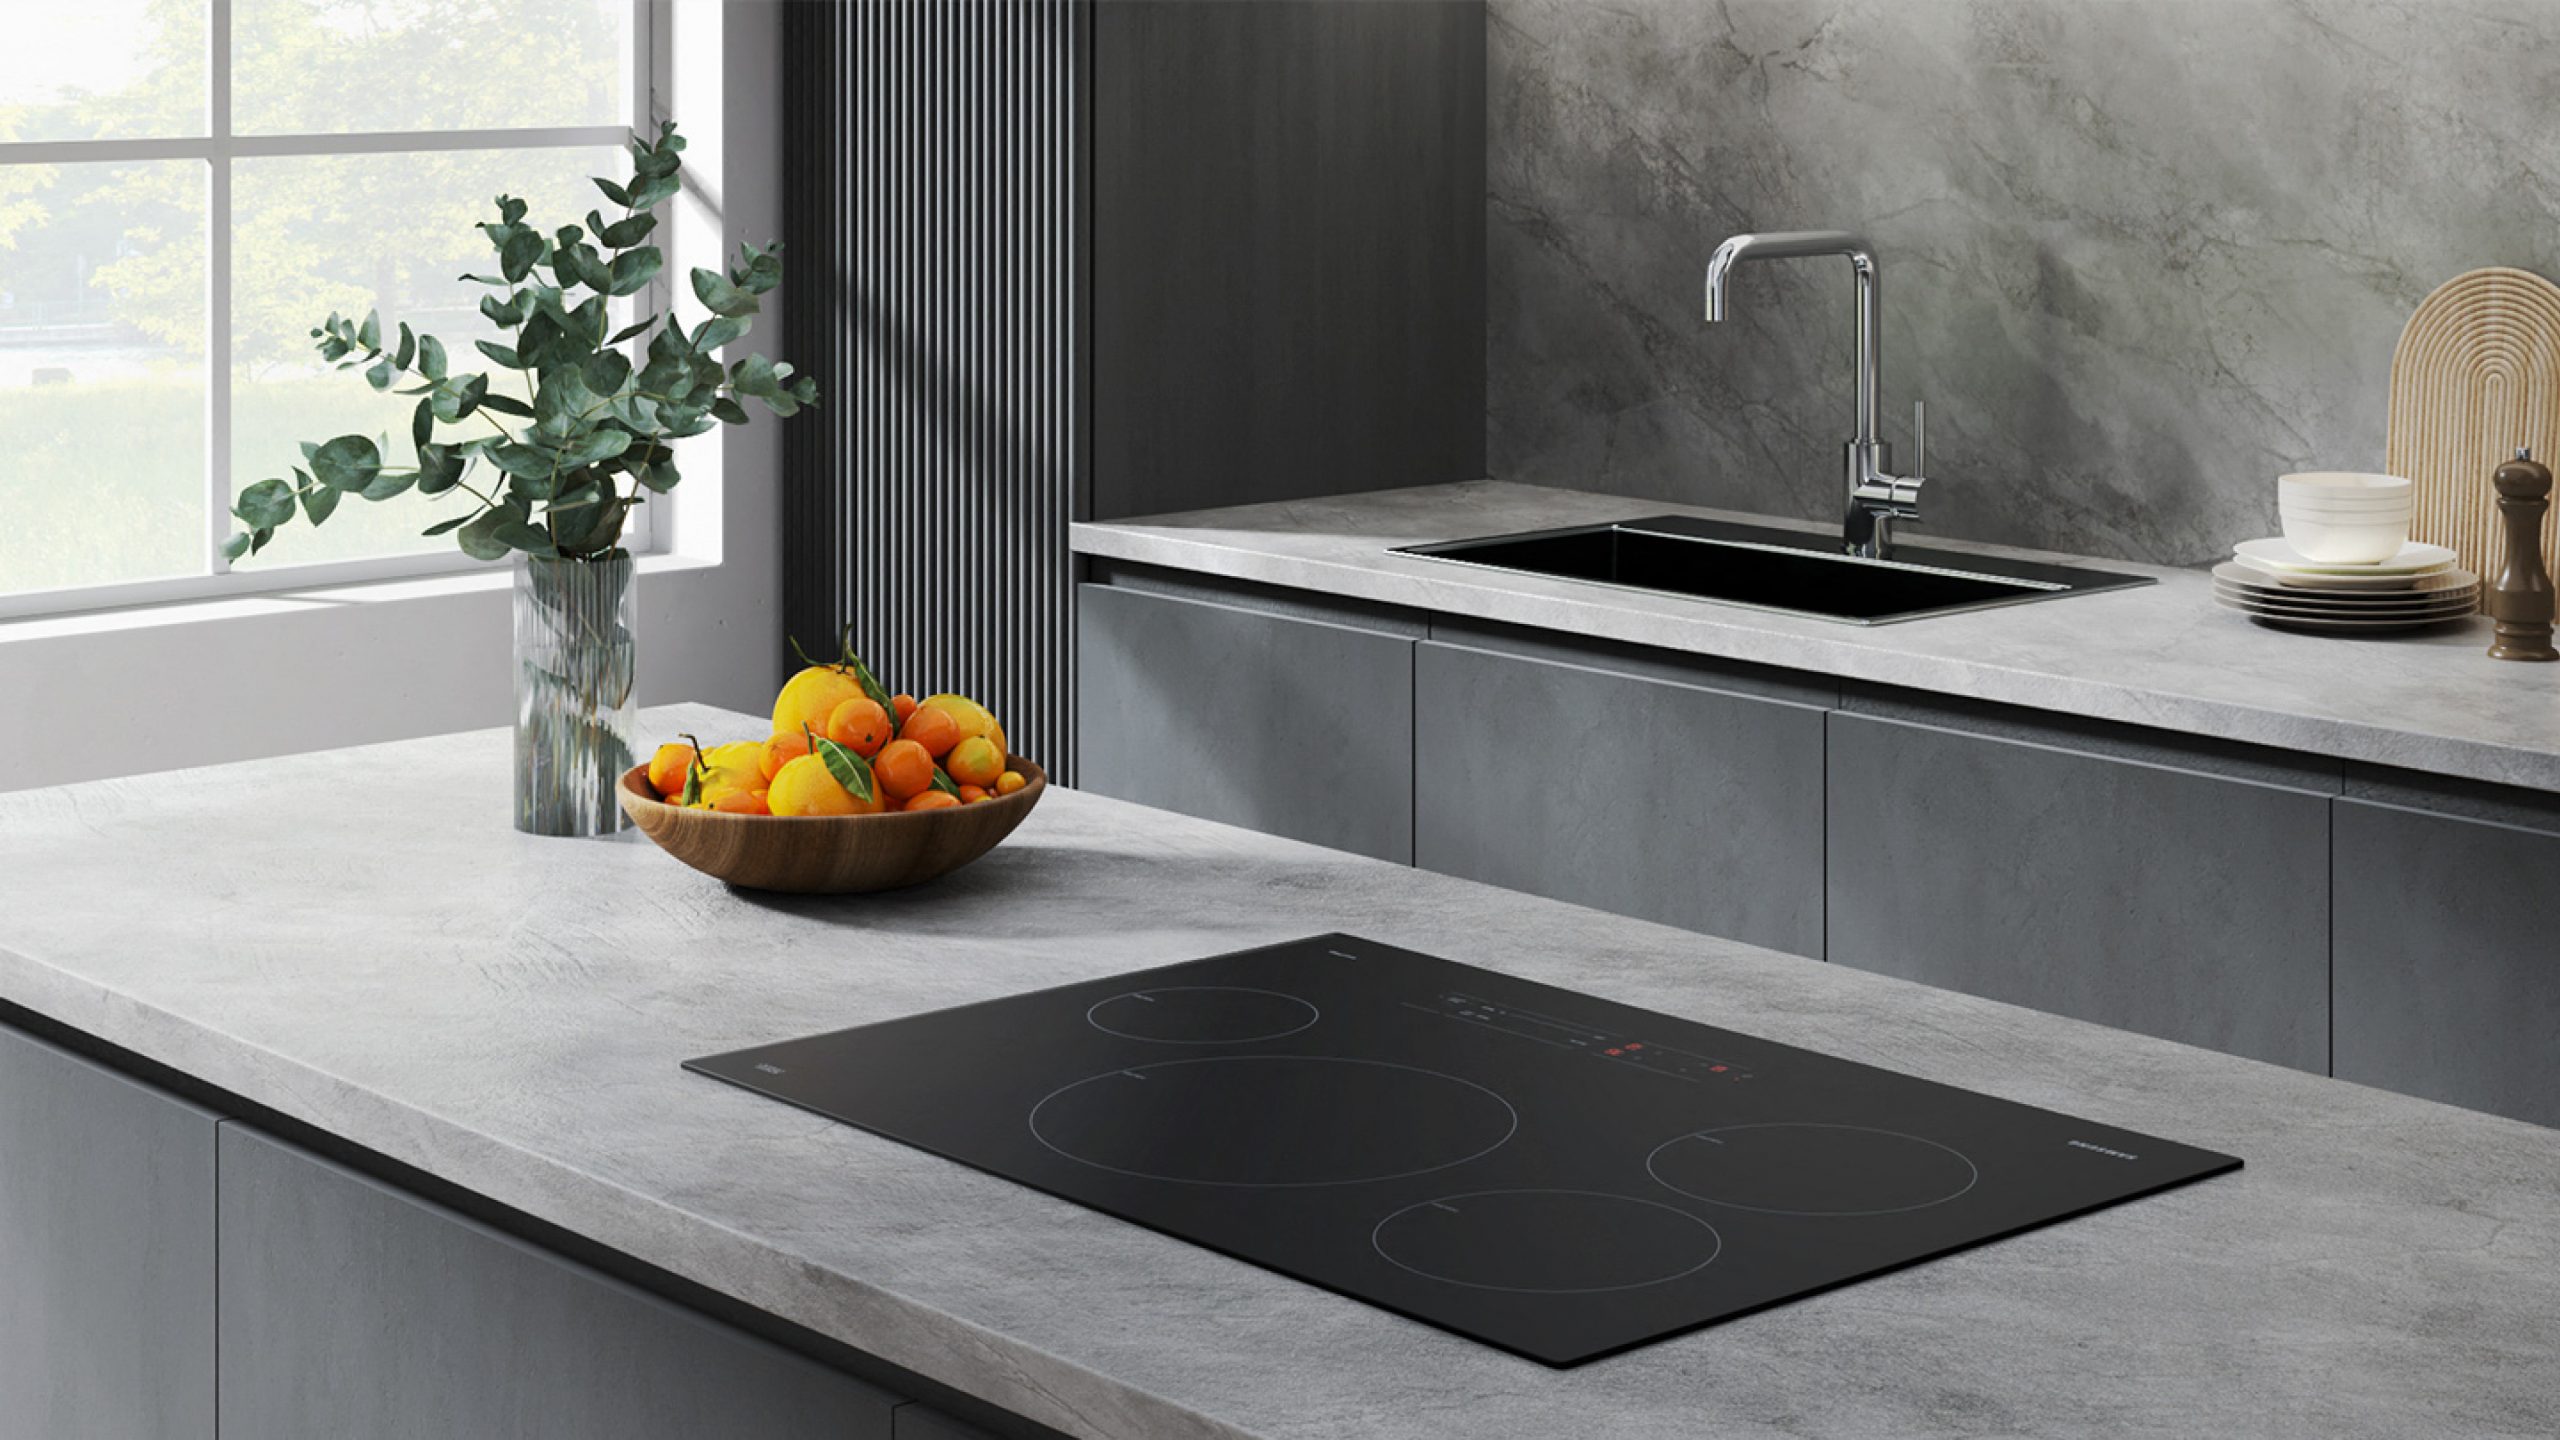 Samsung Smart Induction Built-In Cooktop with Wi-Fi